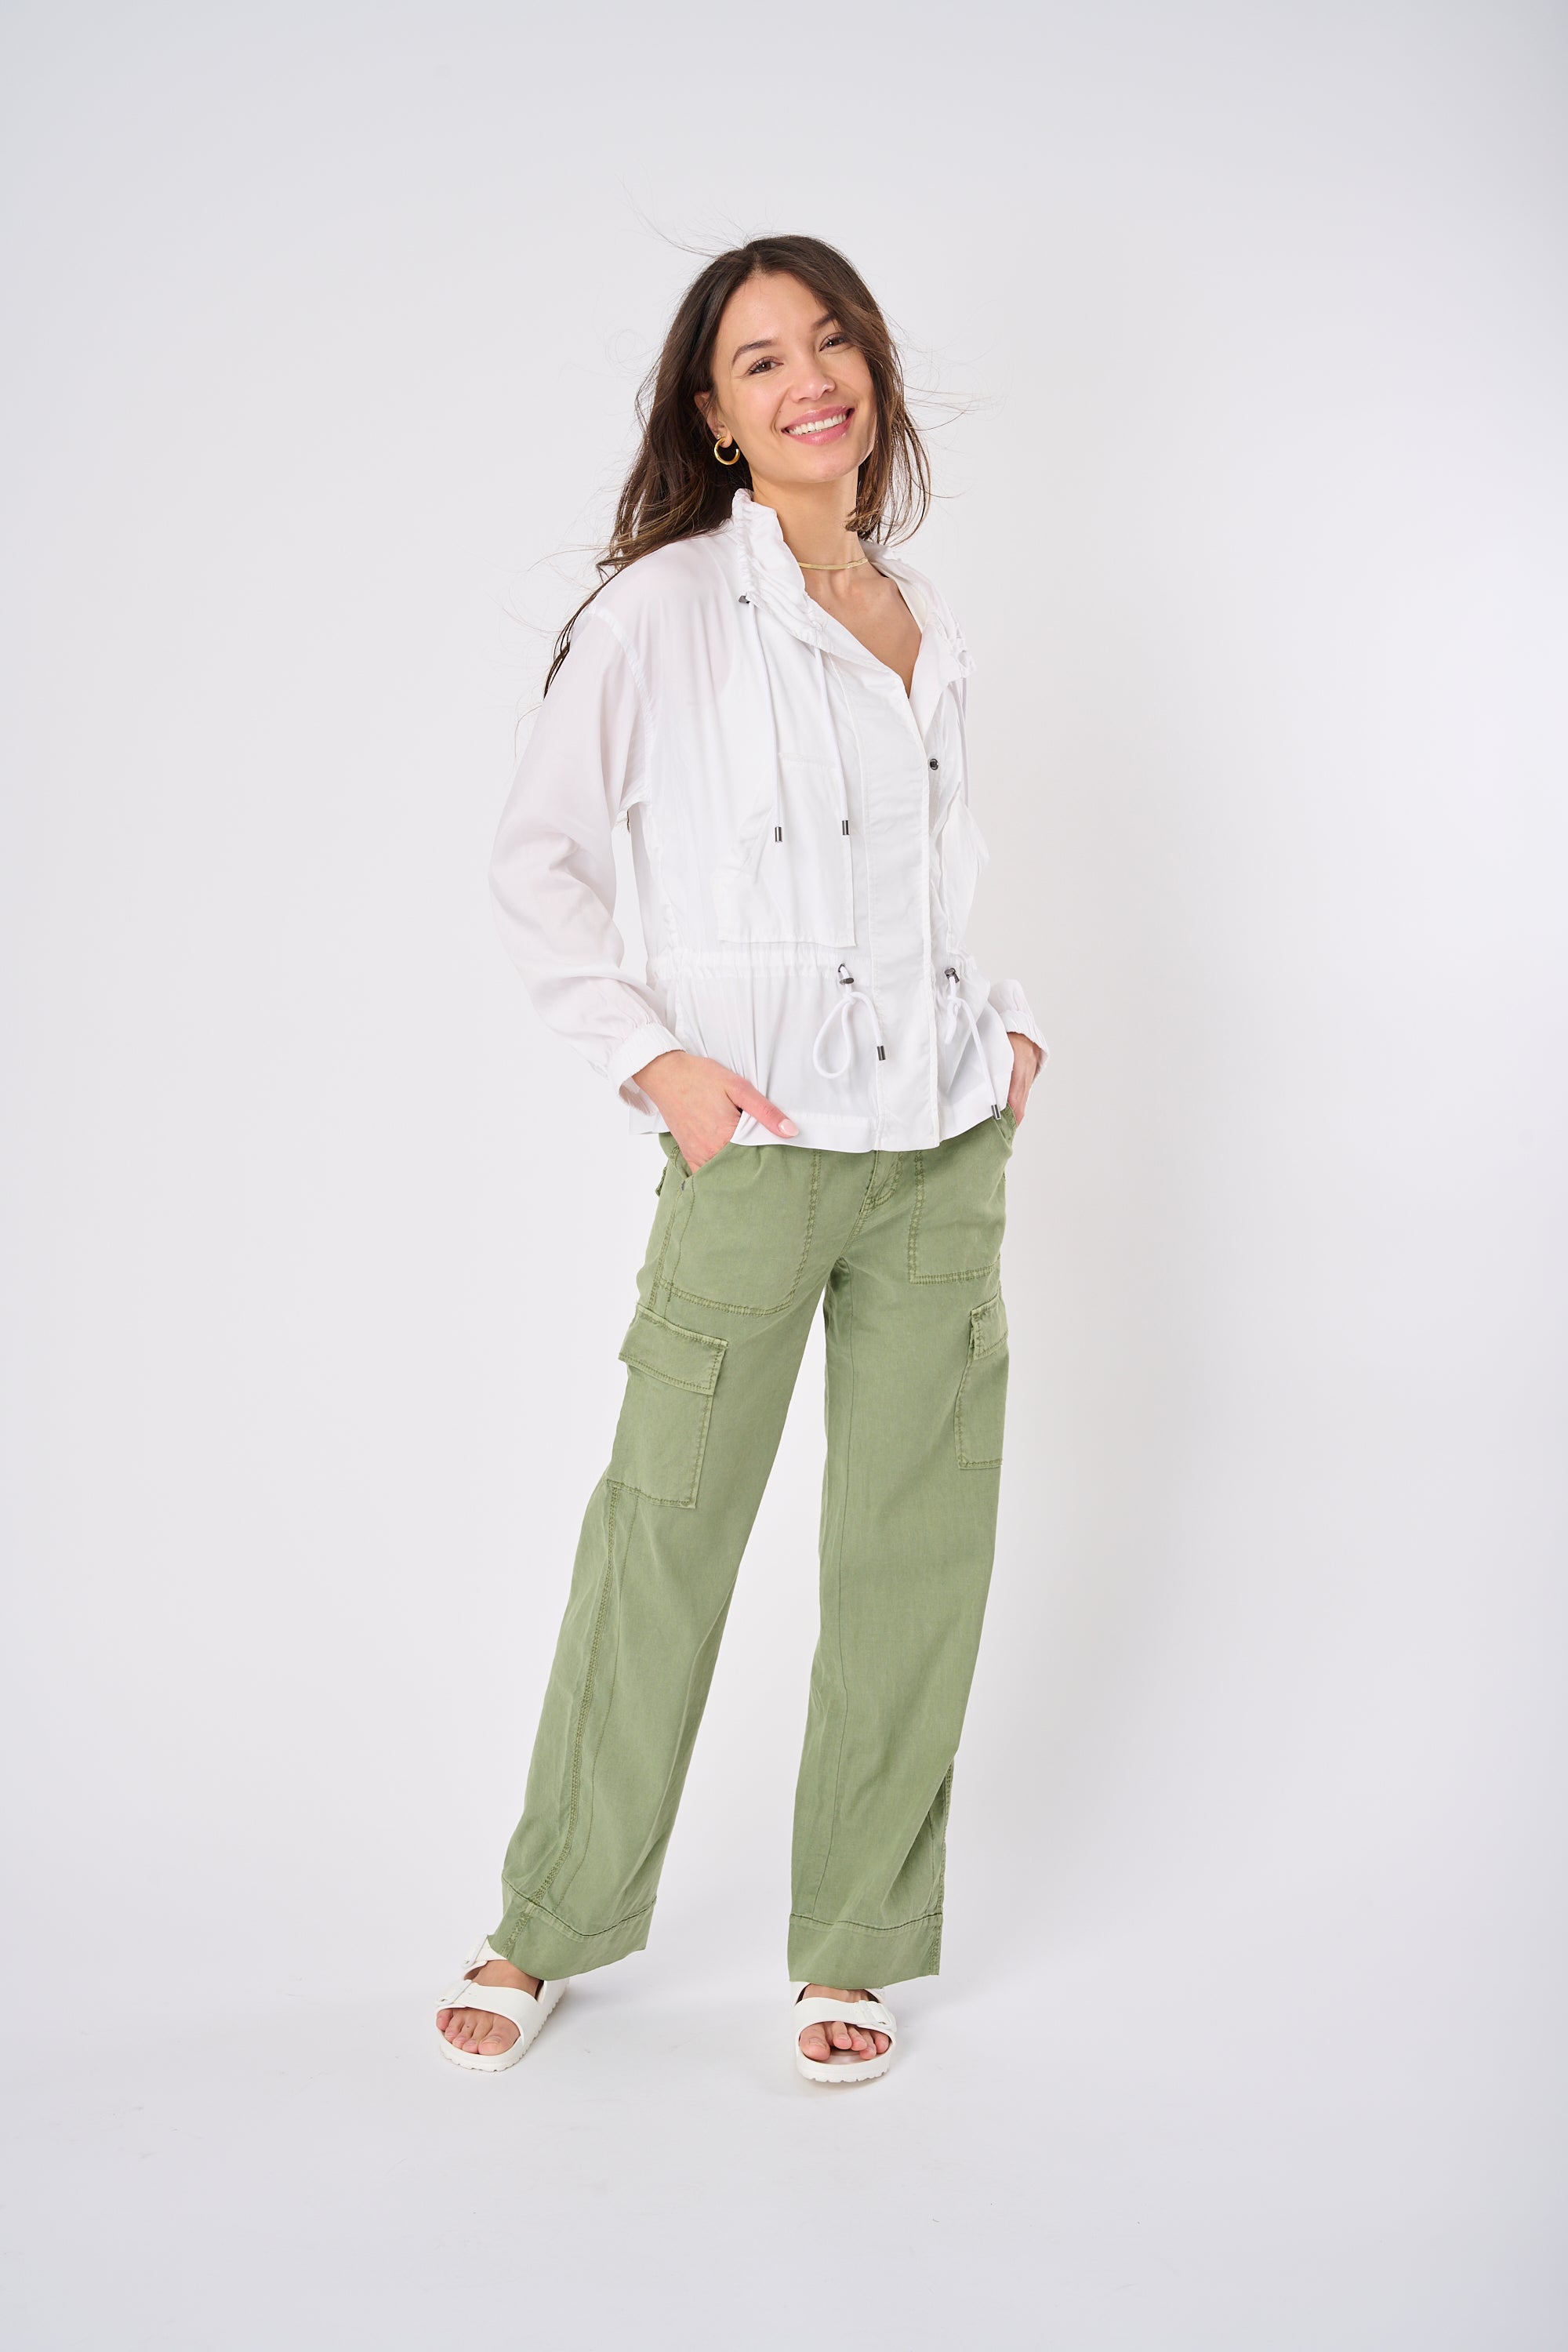 The Kim Cargo Jogger Pants in Olive (Small-Large) – AllyOops Boutique